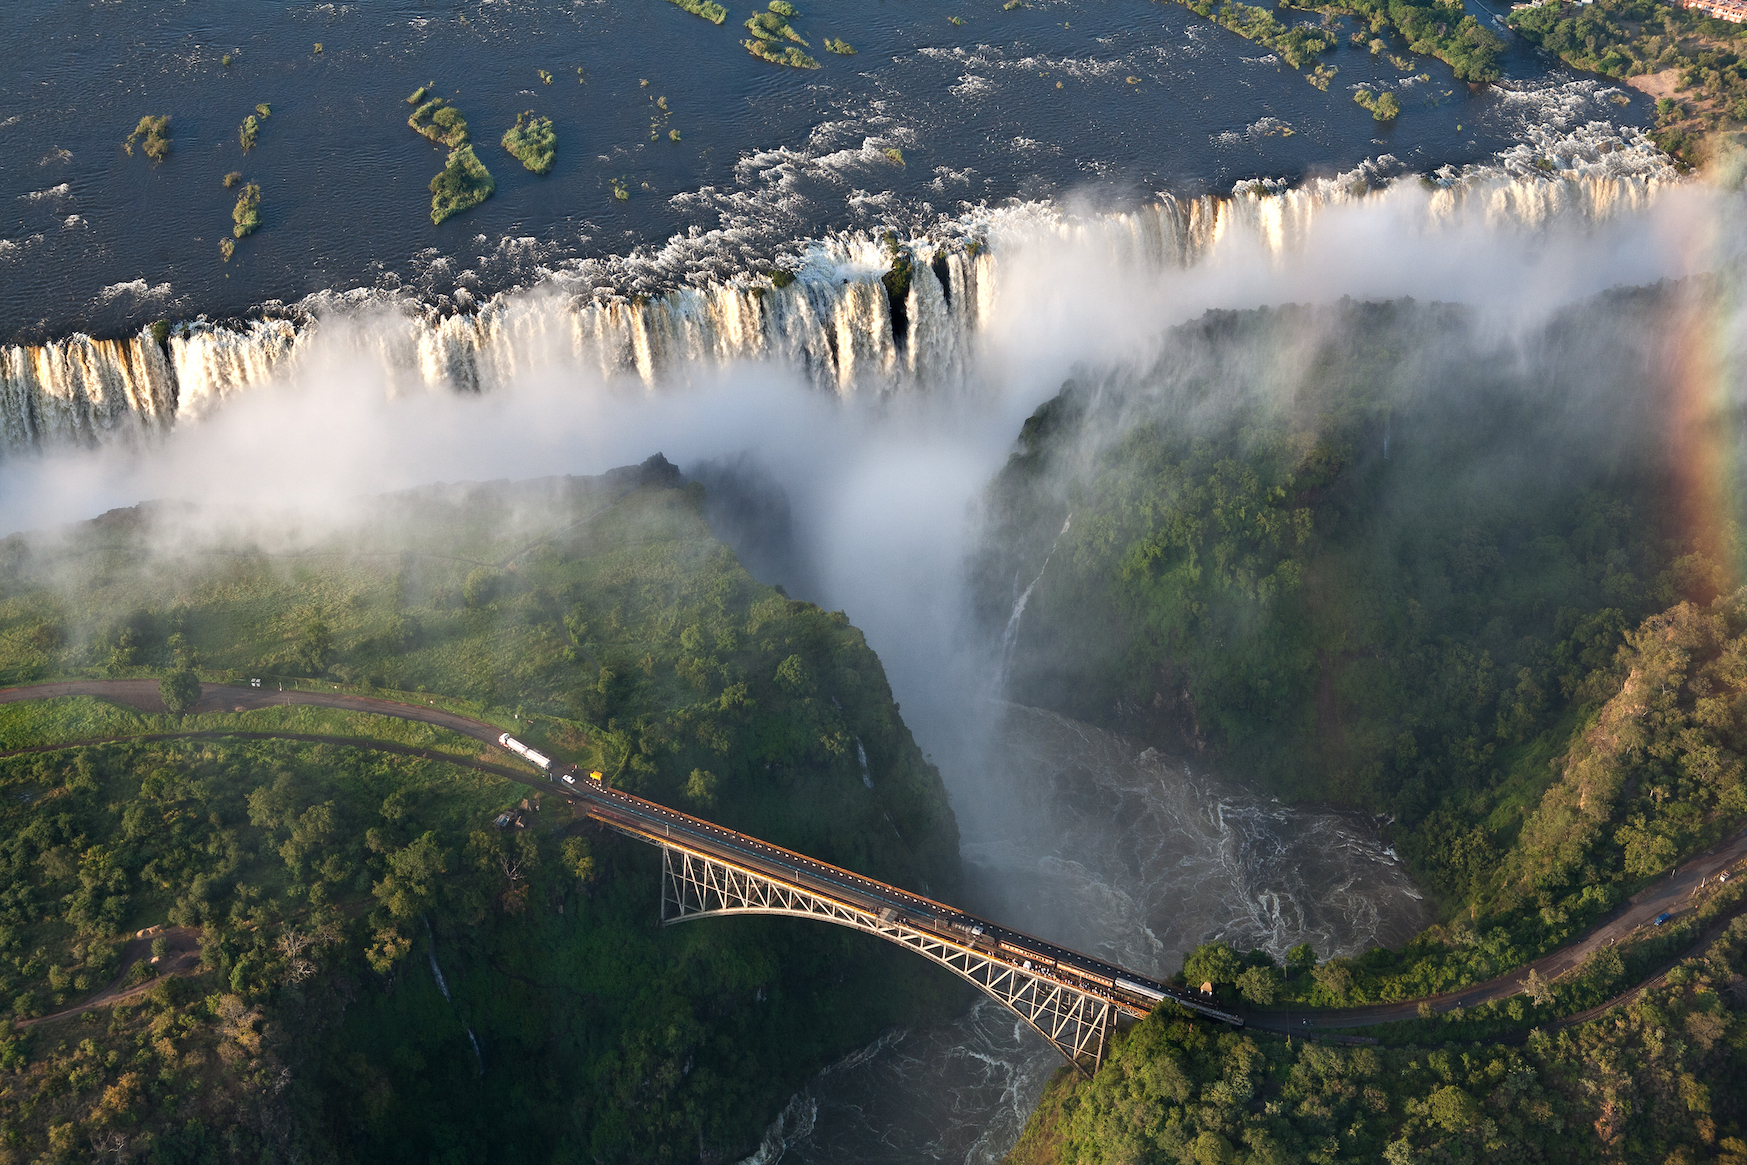 Victoria Falls in Zambia seen from above, with a bridge spannijng the river and a rainbow over the waterfall on the right